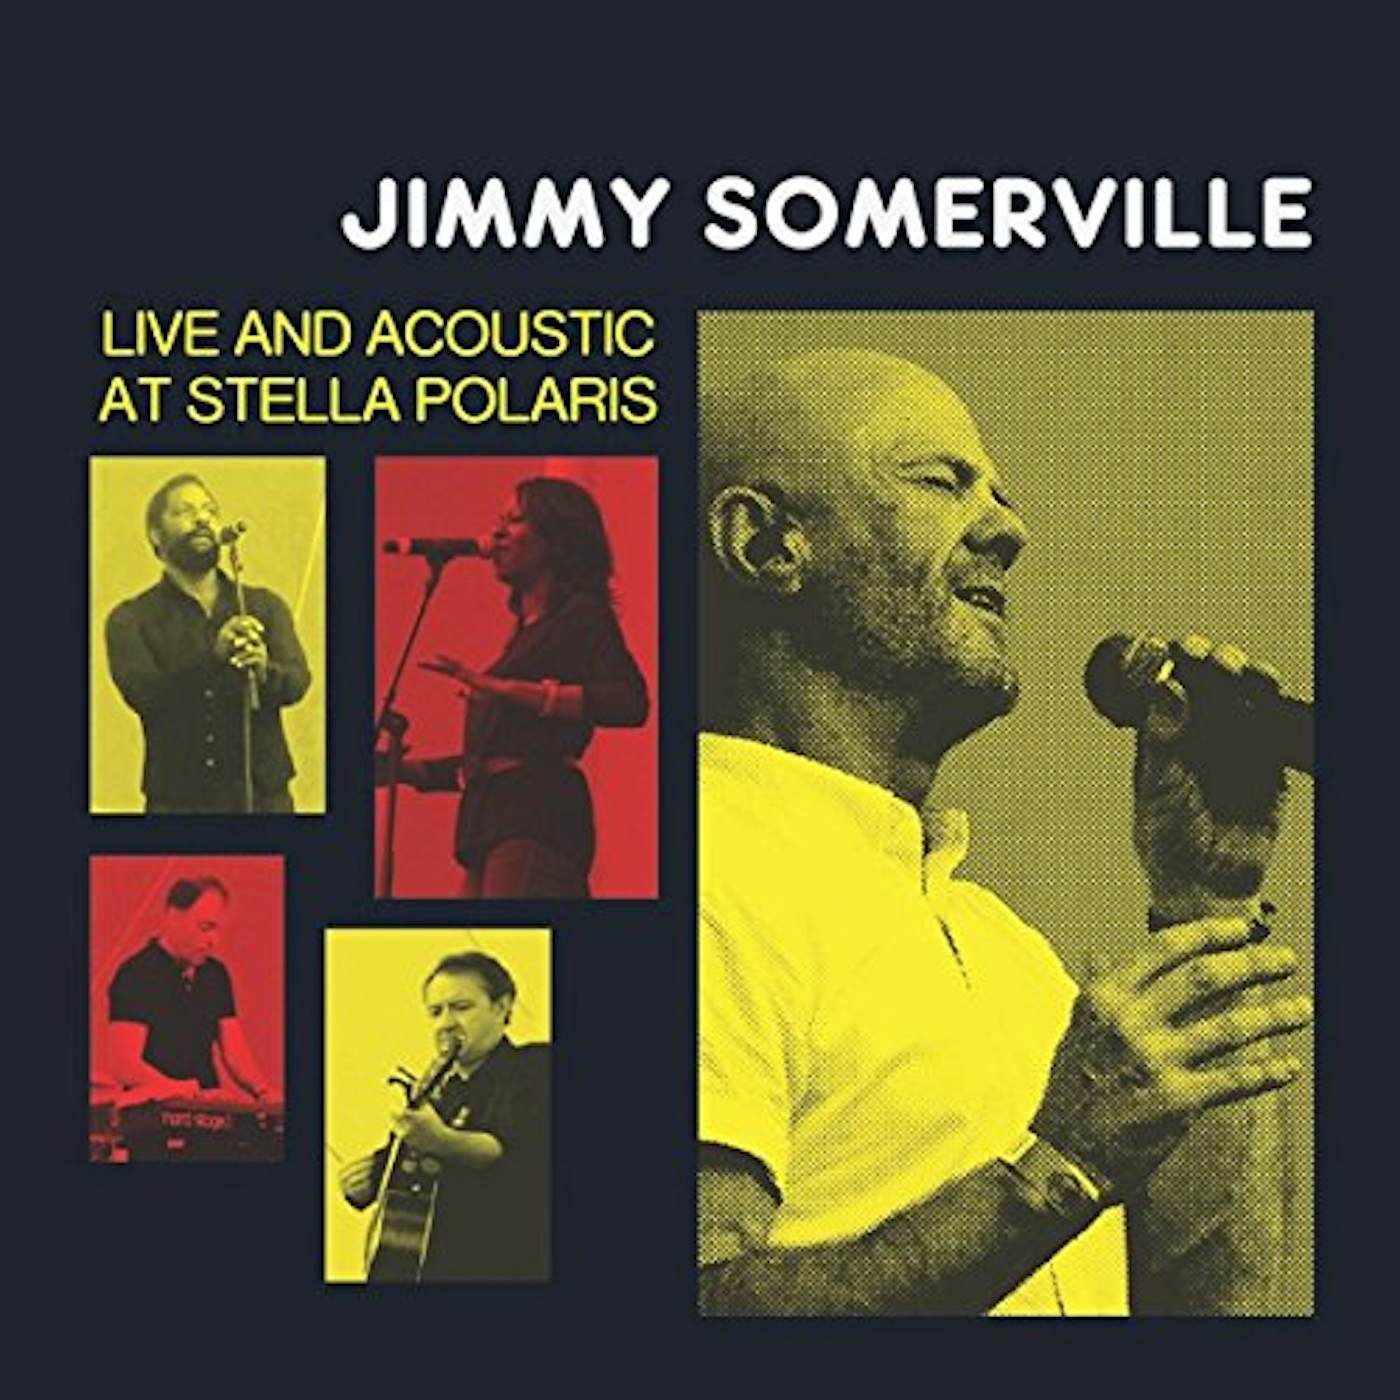 Jimmy Somerville Live And Acoustic At Stella Polaris Vinyl Record